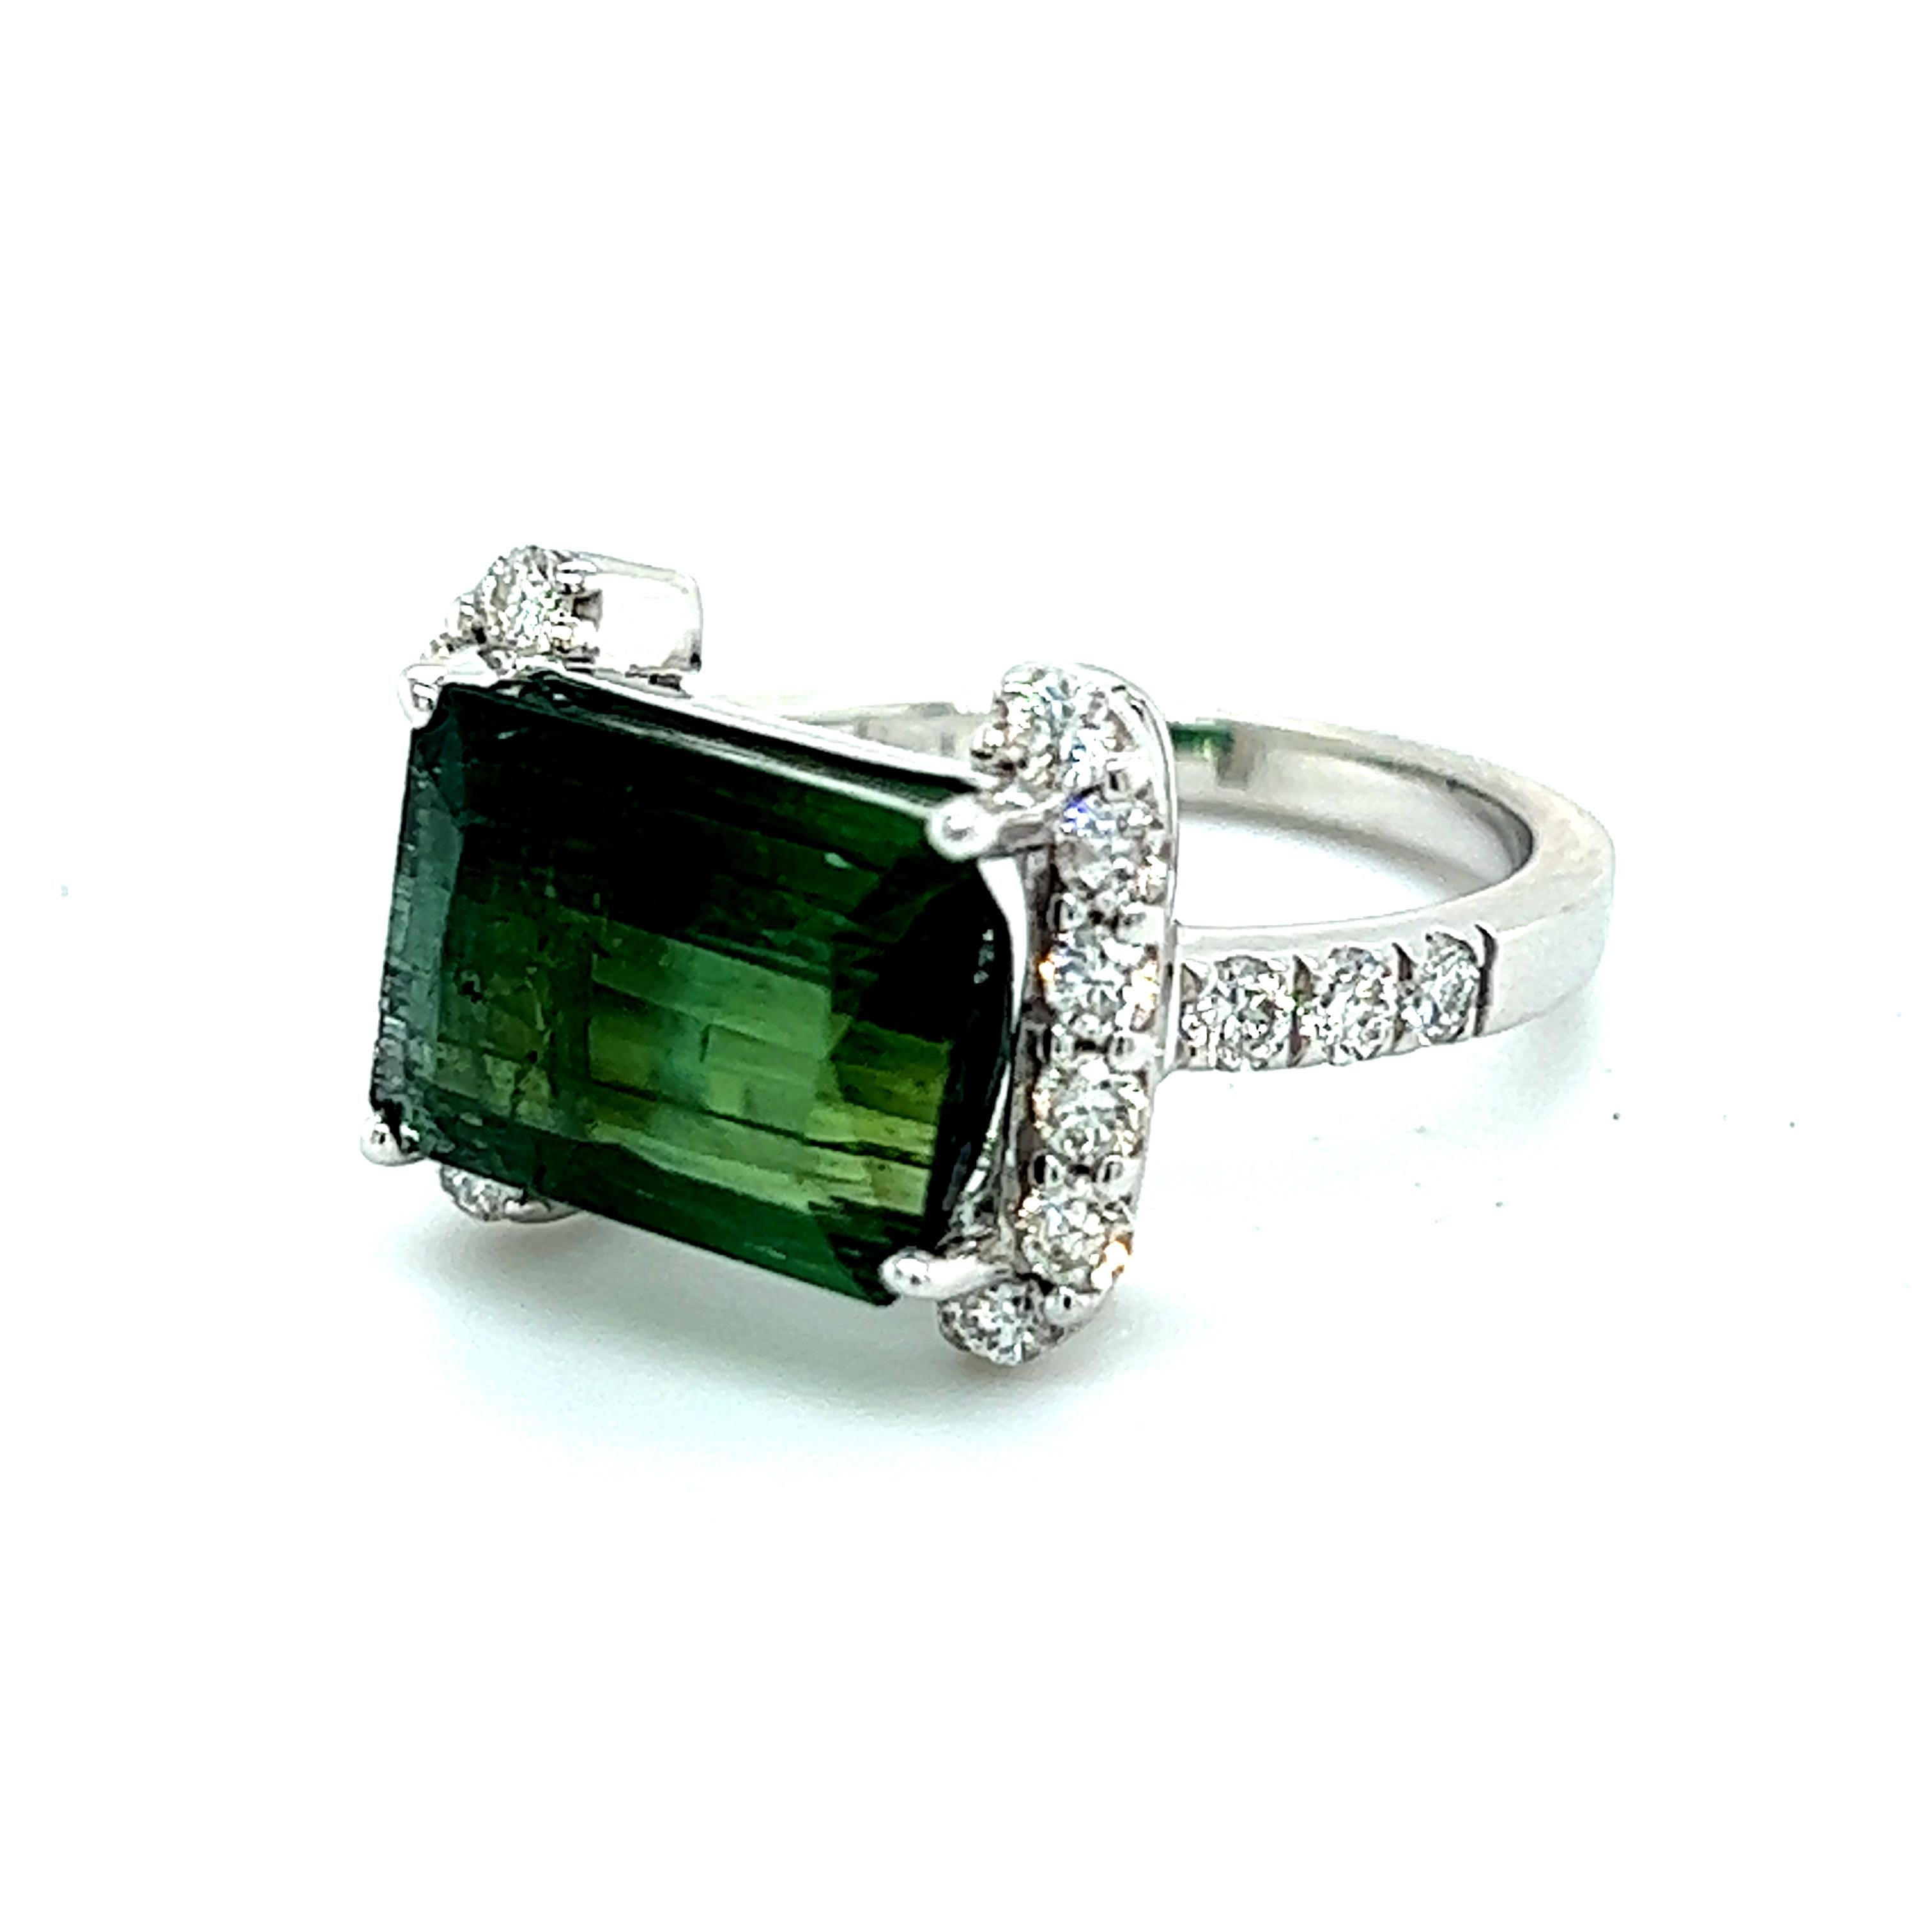 Natural Tourmaline Diamond Ring 14k W Gold 4.2 TCW Certified For Sale 3